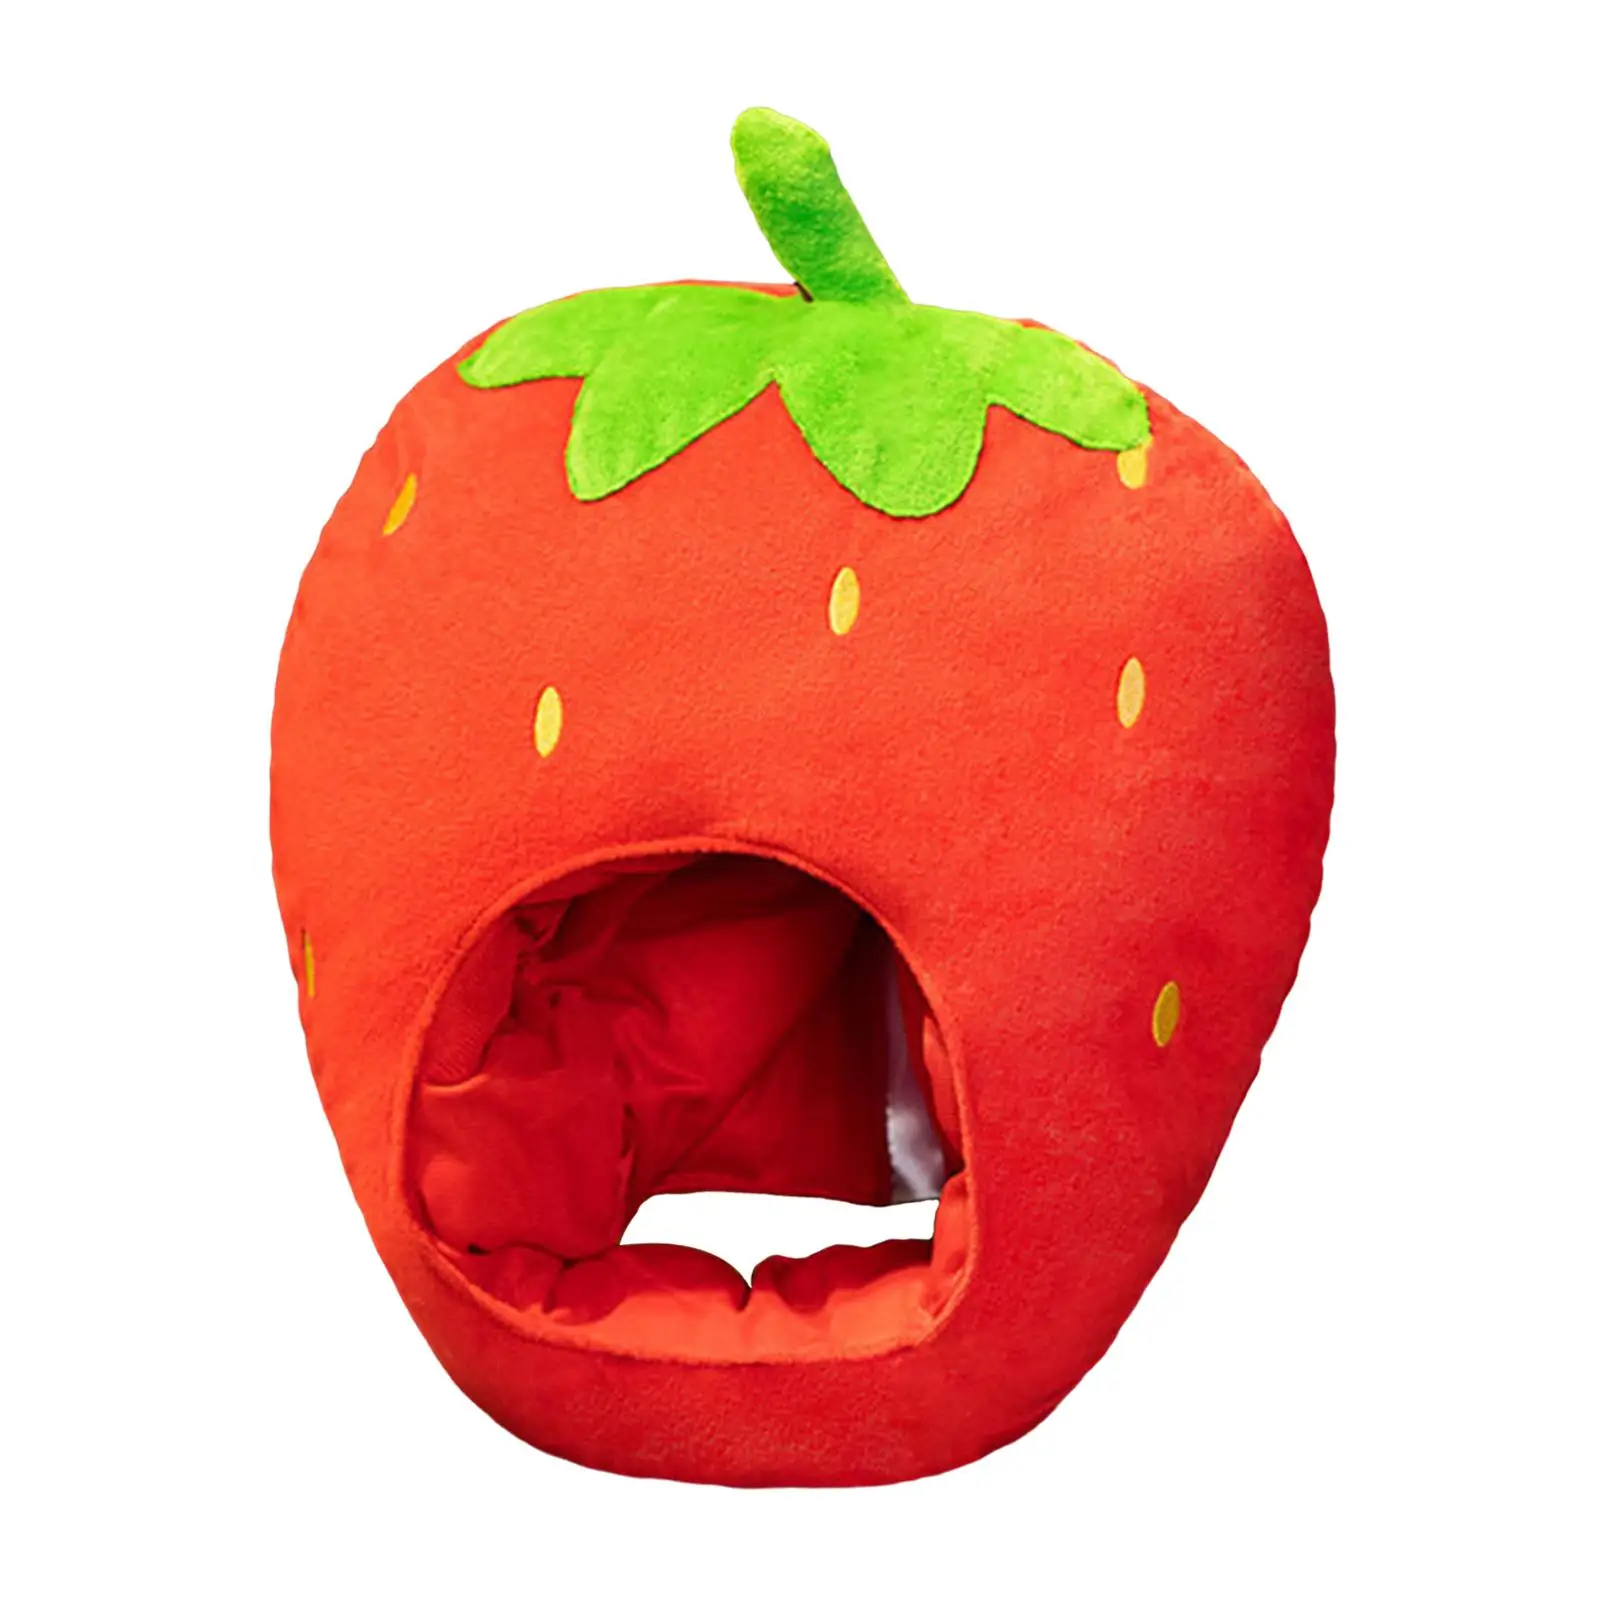 Soft Strawberry Hat Decor Head Warmer Comfortable Novelty Costume Hat Headdress for Cosplay Party Halloween Holiday Women Men